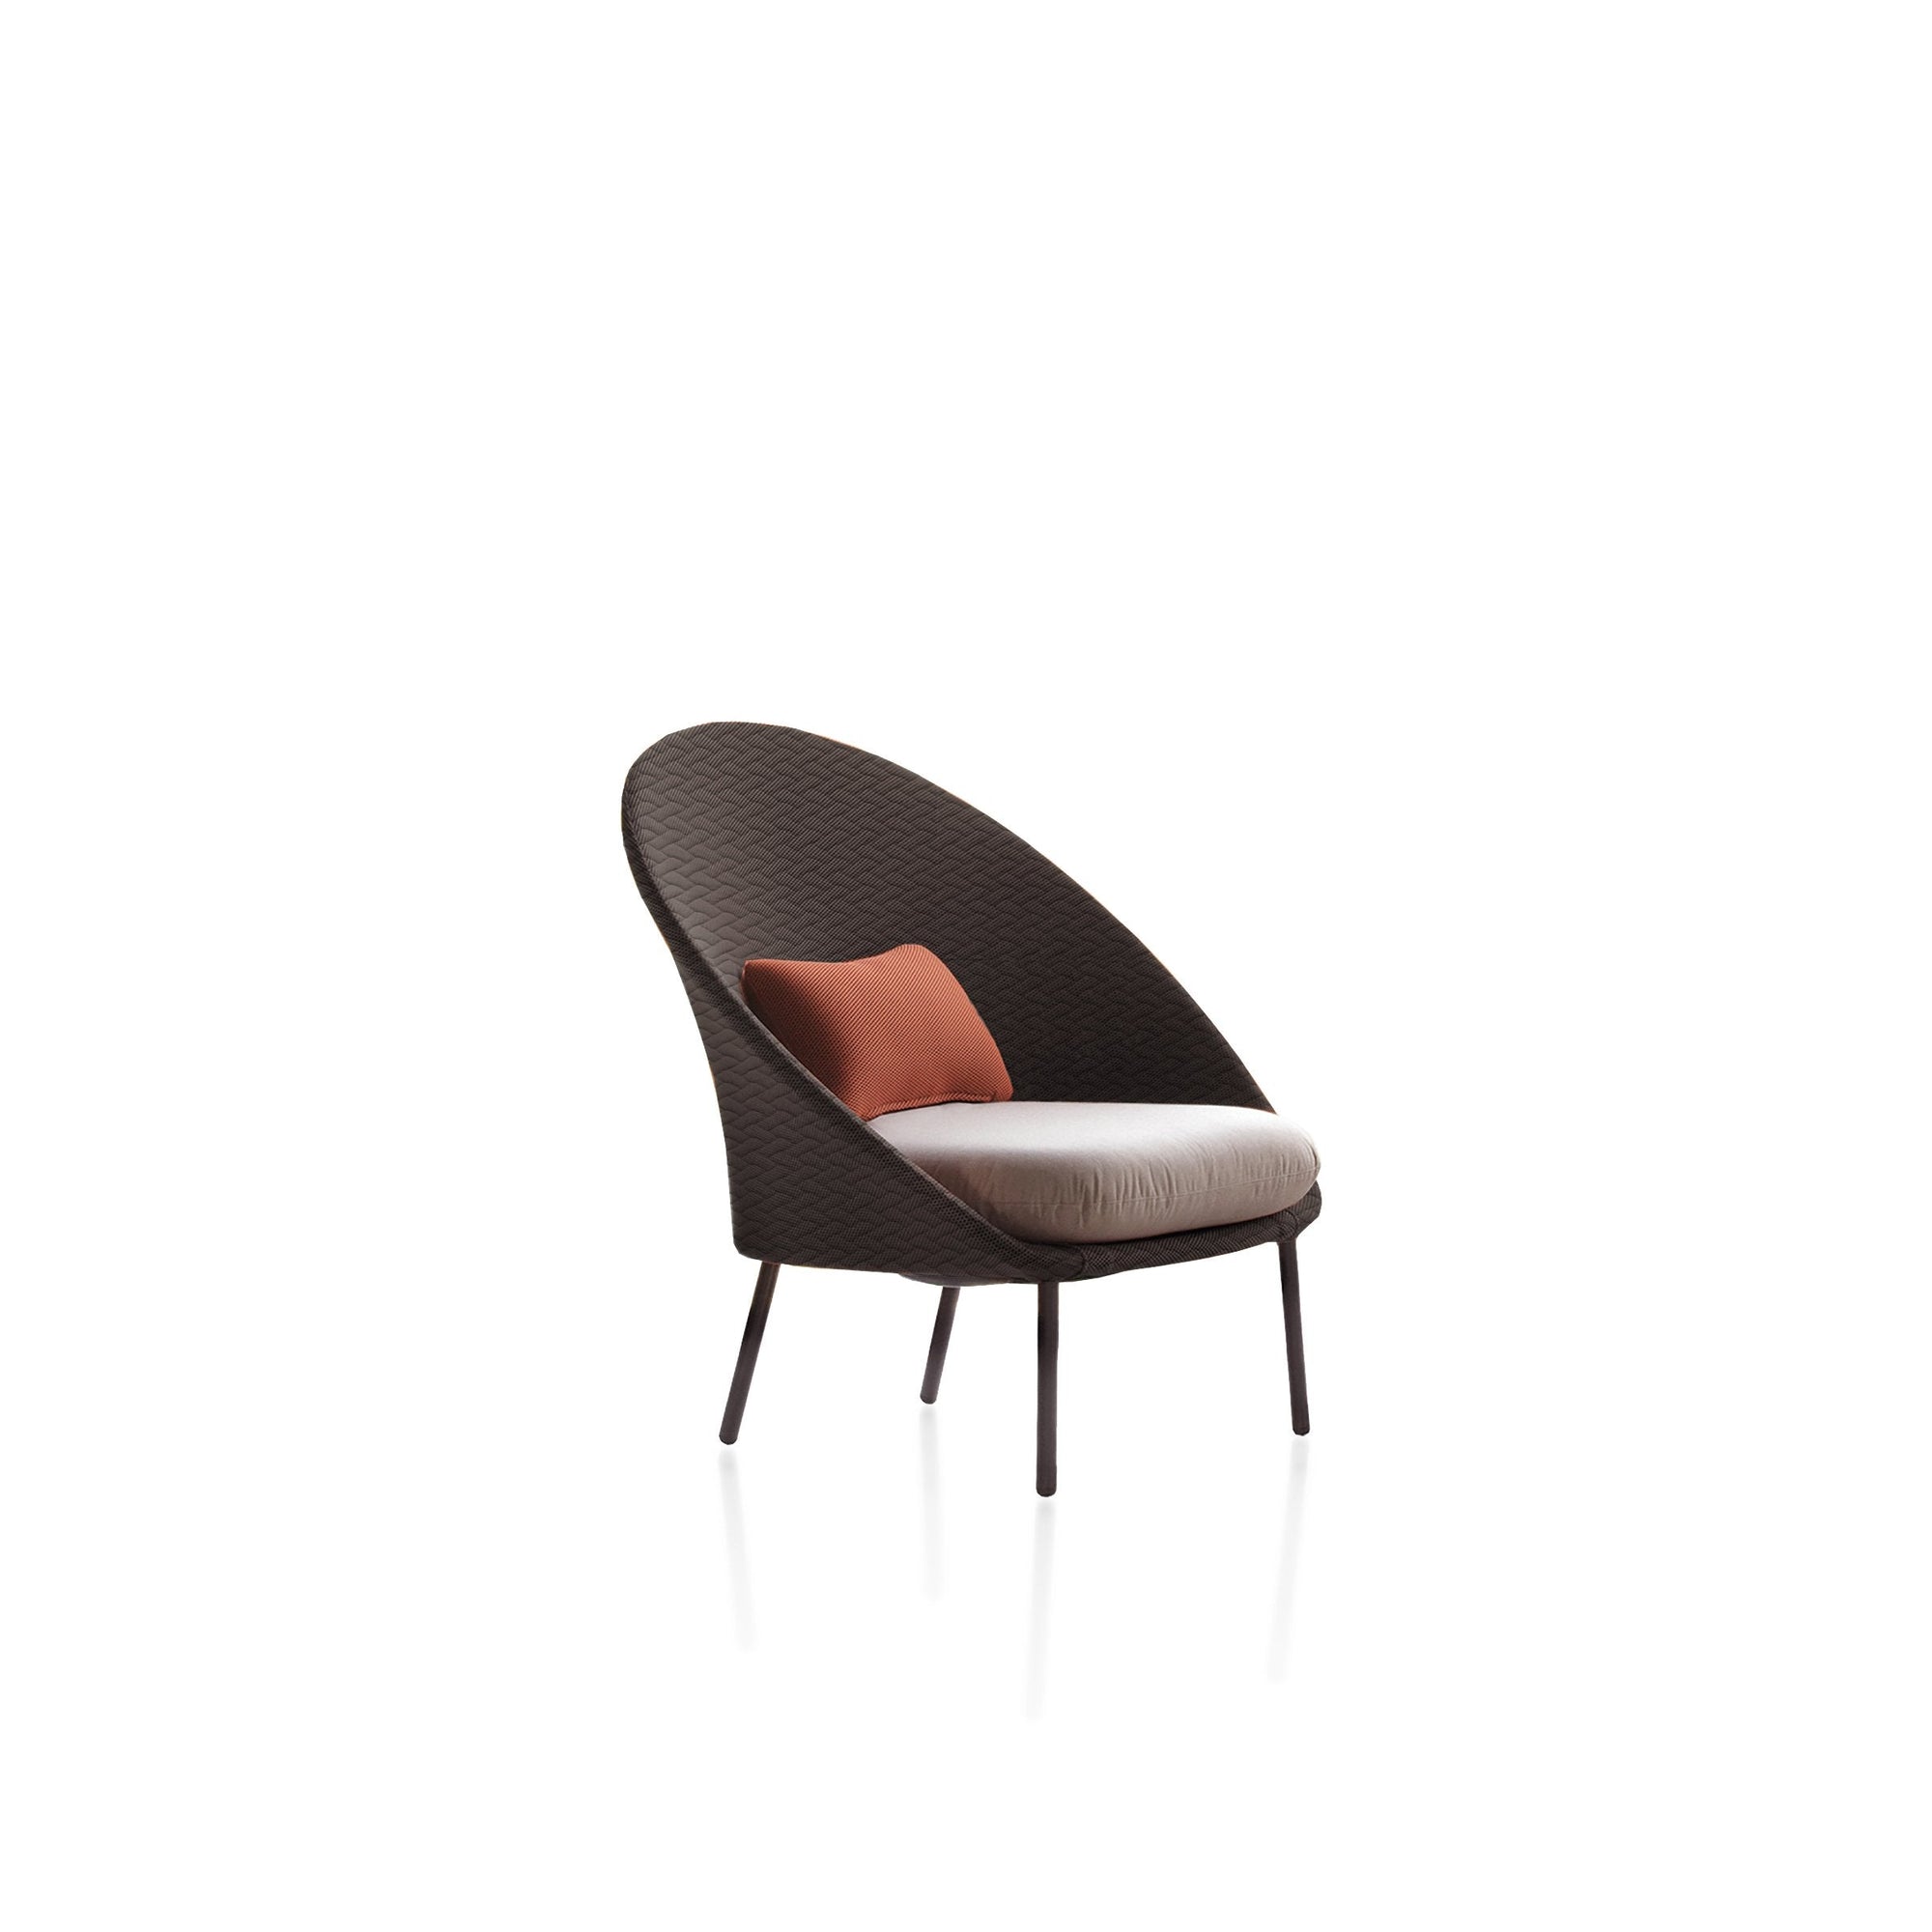 C170 Lounge Chair "Twins"-Expormim-Contract Furniture Store